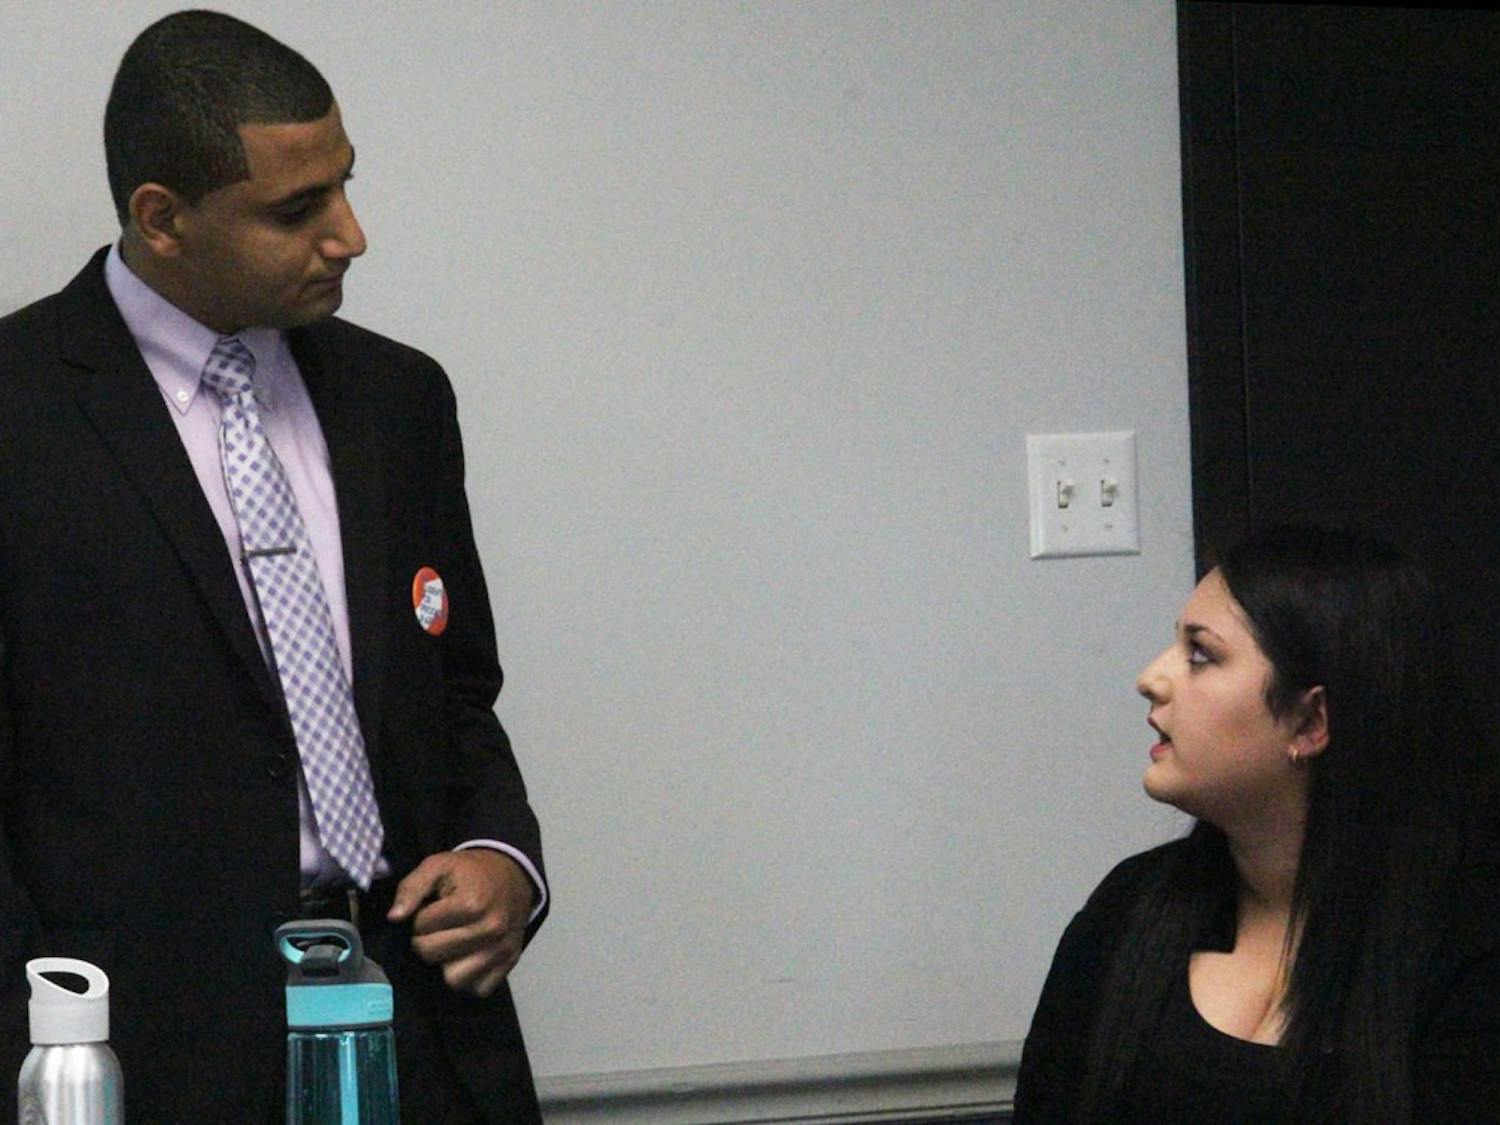 Yaser Soliman (left) speaks to senator Alexis Ogra (right) during his senate chair election speech. Soliman lost the election, which SA's own attorney says was invalid, and is advocating for more university oversight of the Student Association. 